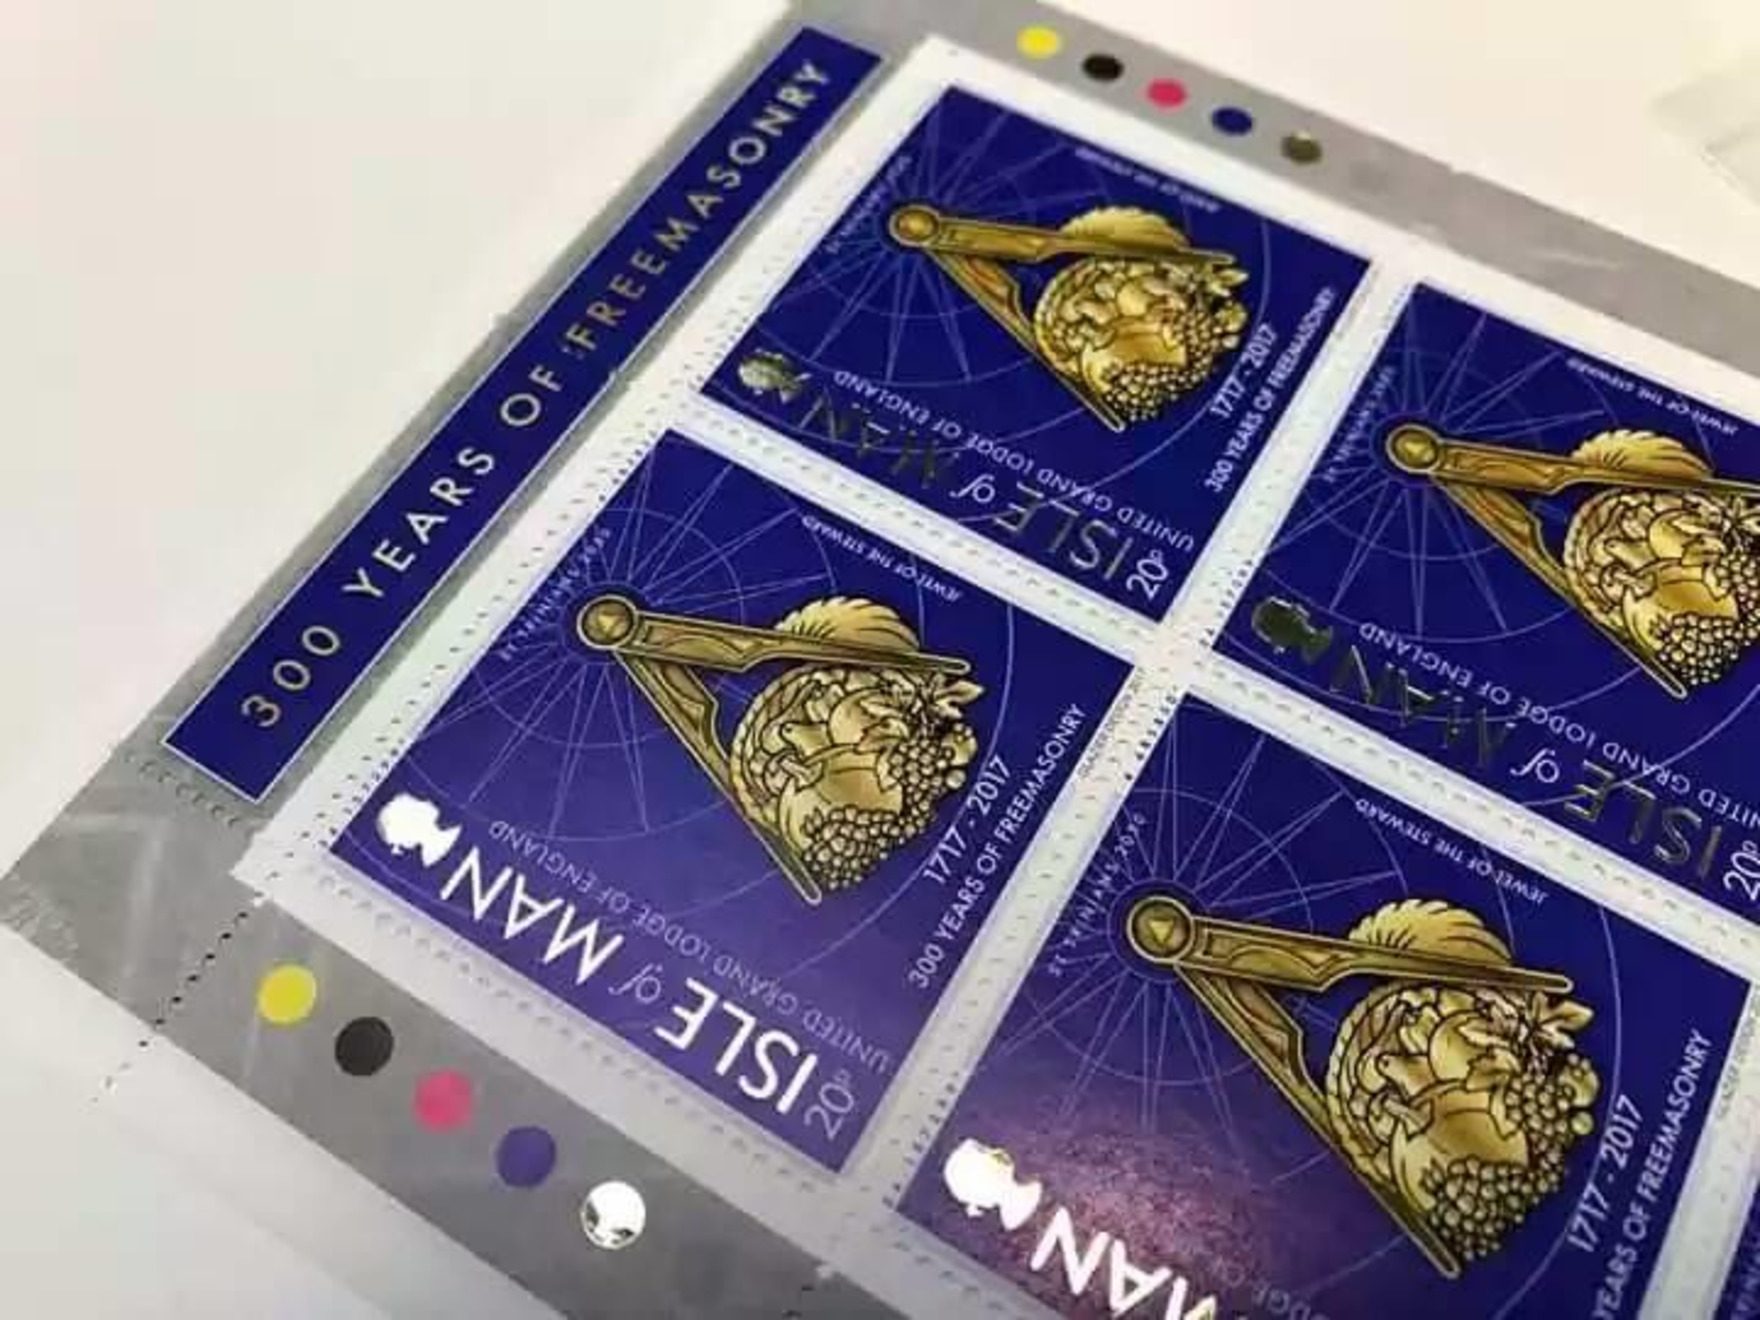 New stamps link to London Air Ambulance and London Masons